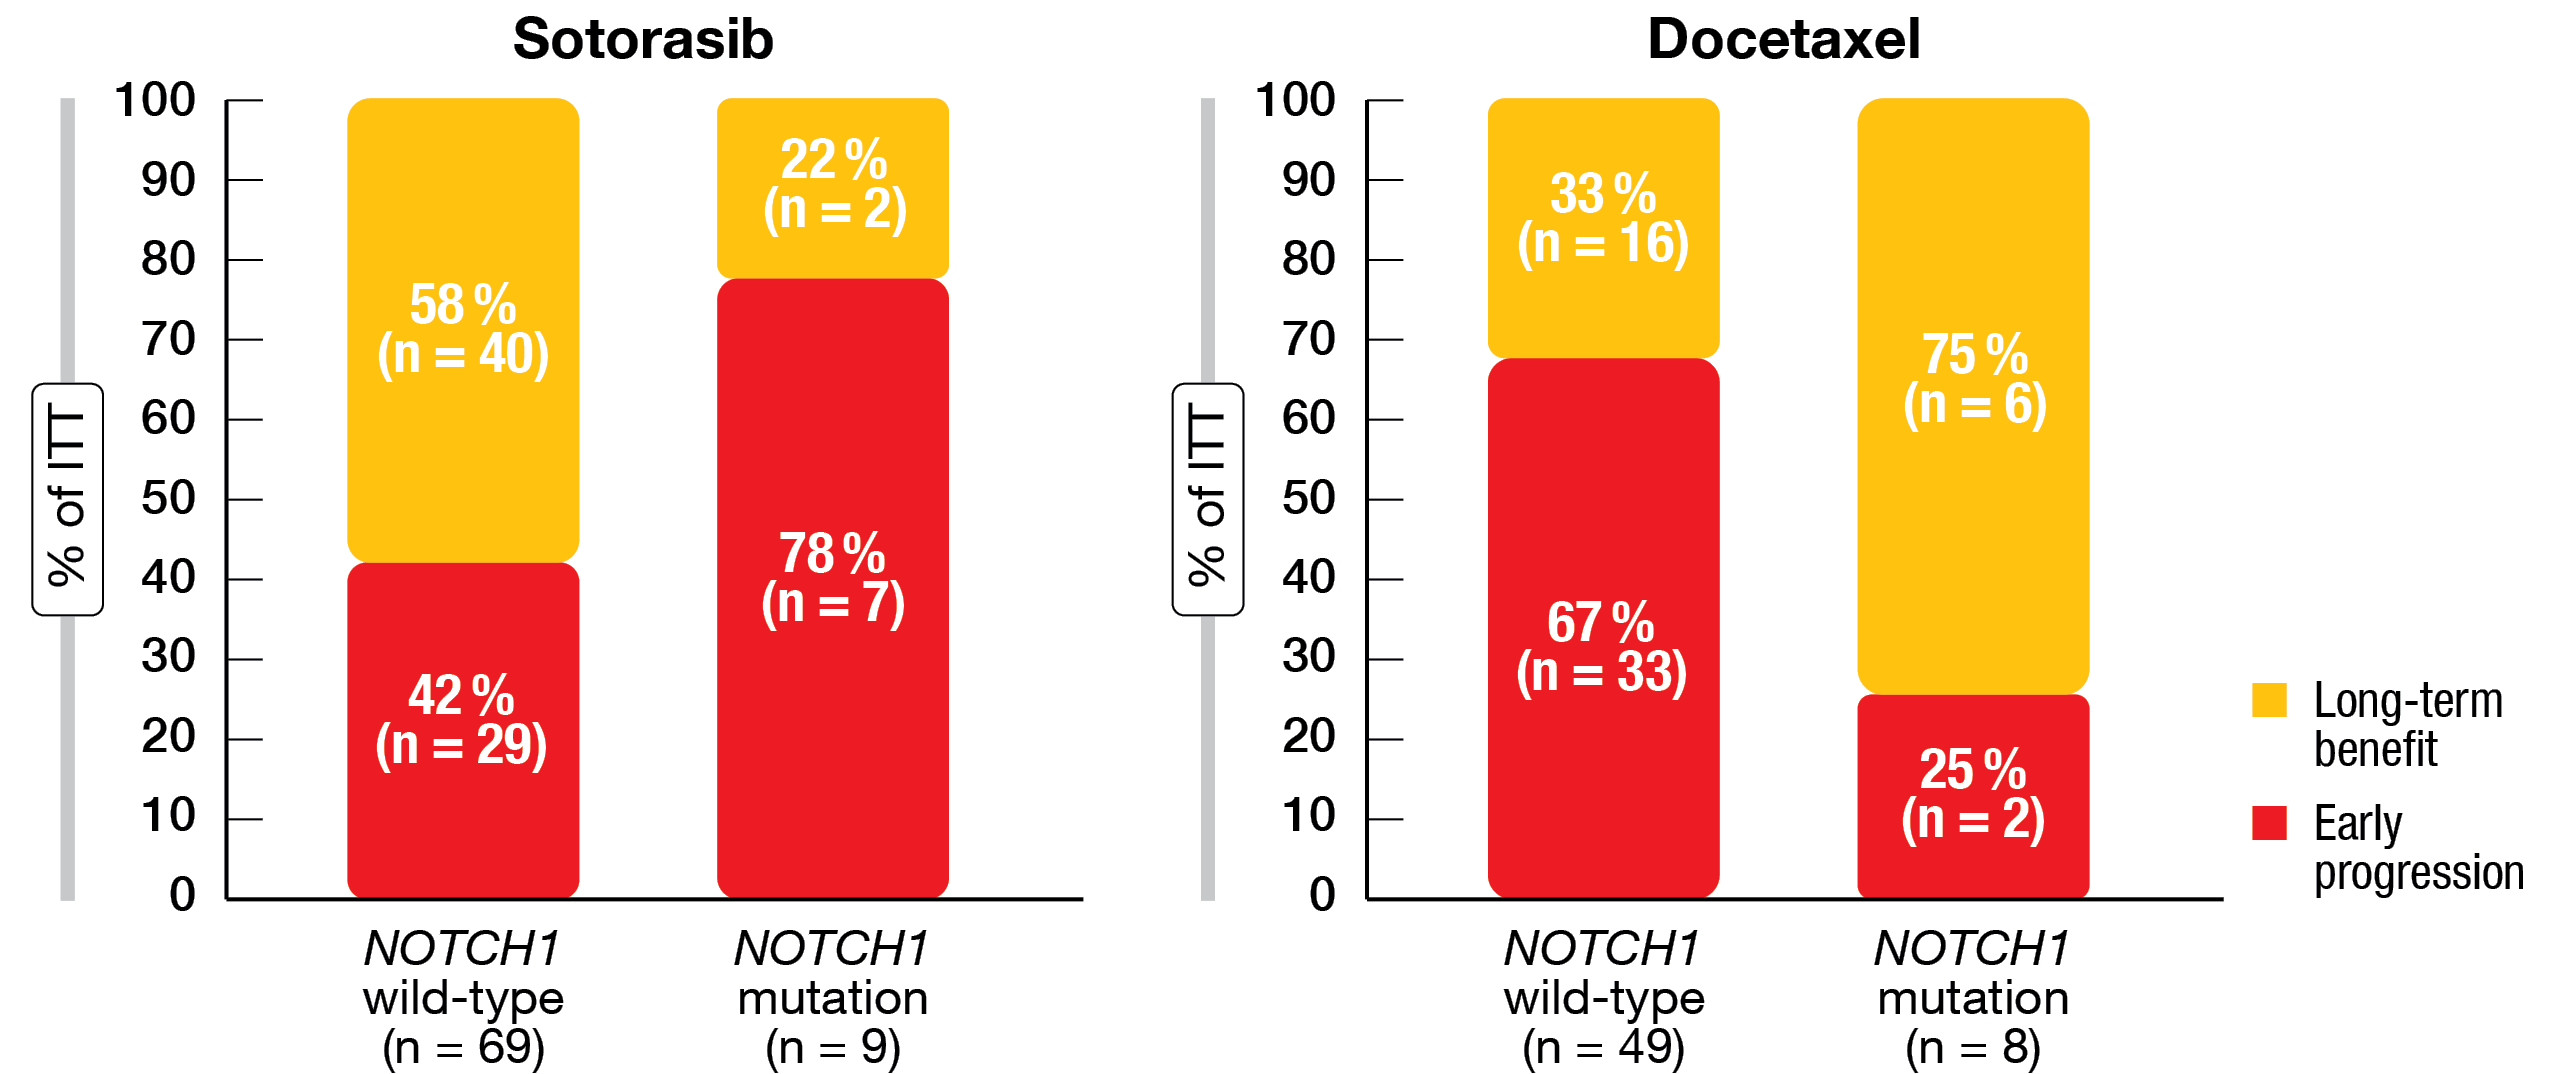 Figure 2: Early progression with sotorasib, but not docetaxel, in the presence of NOTCH1 mutations